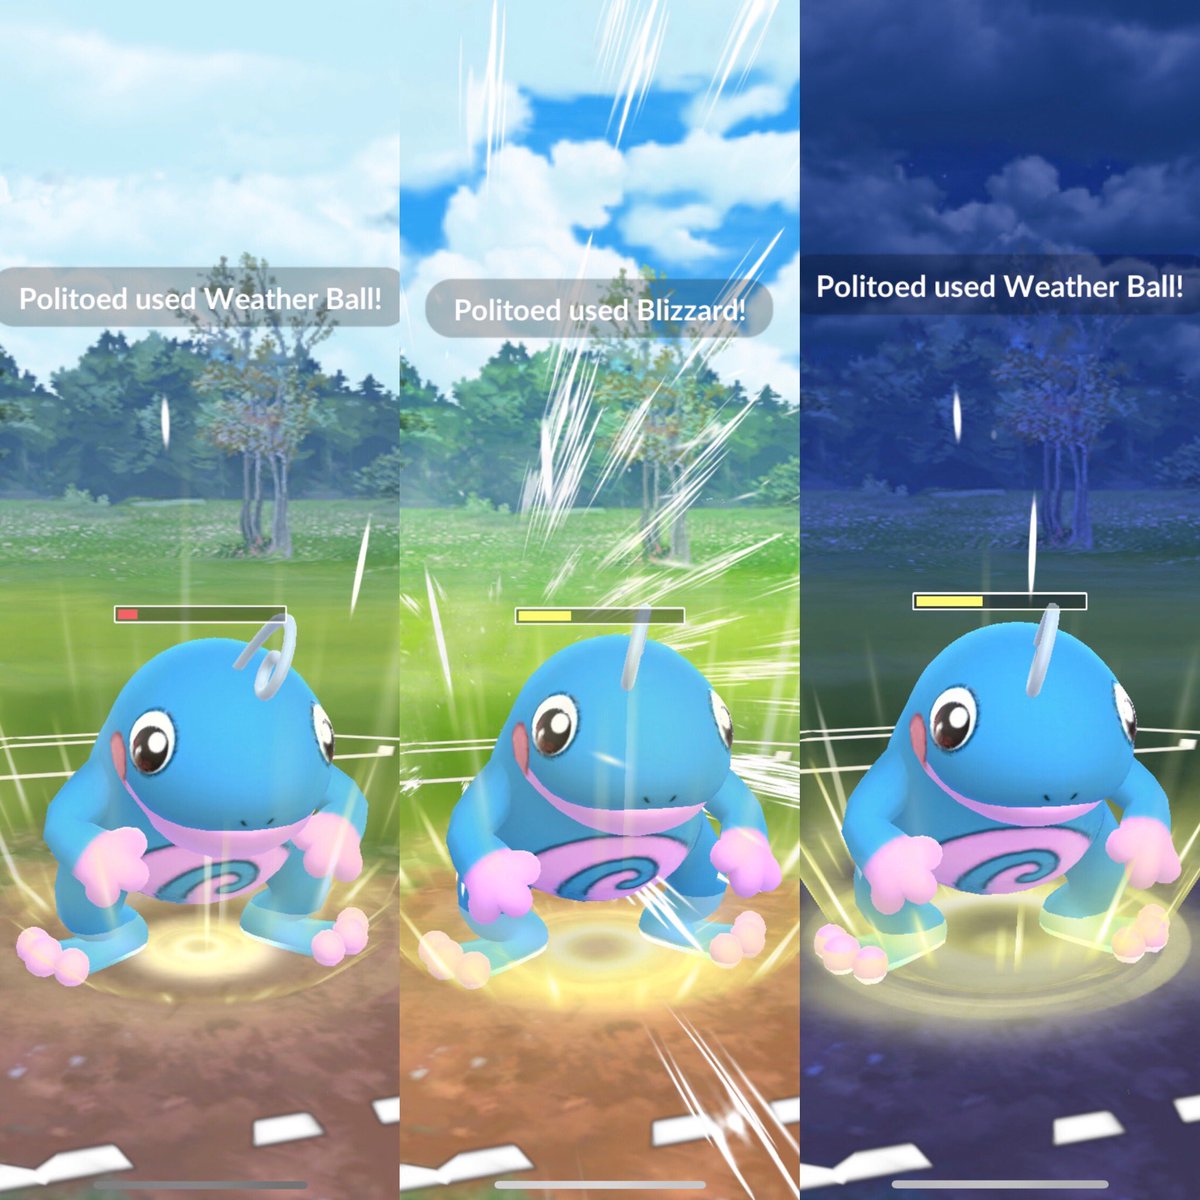 Today’s #mvp 🏆  ➡️ #politoad ✨ 
—
Wow I’m impressed with my politoad’s performance today! 🤩
—
#pokemongo #gbl #pvp #greatleague #greatleagueremix